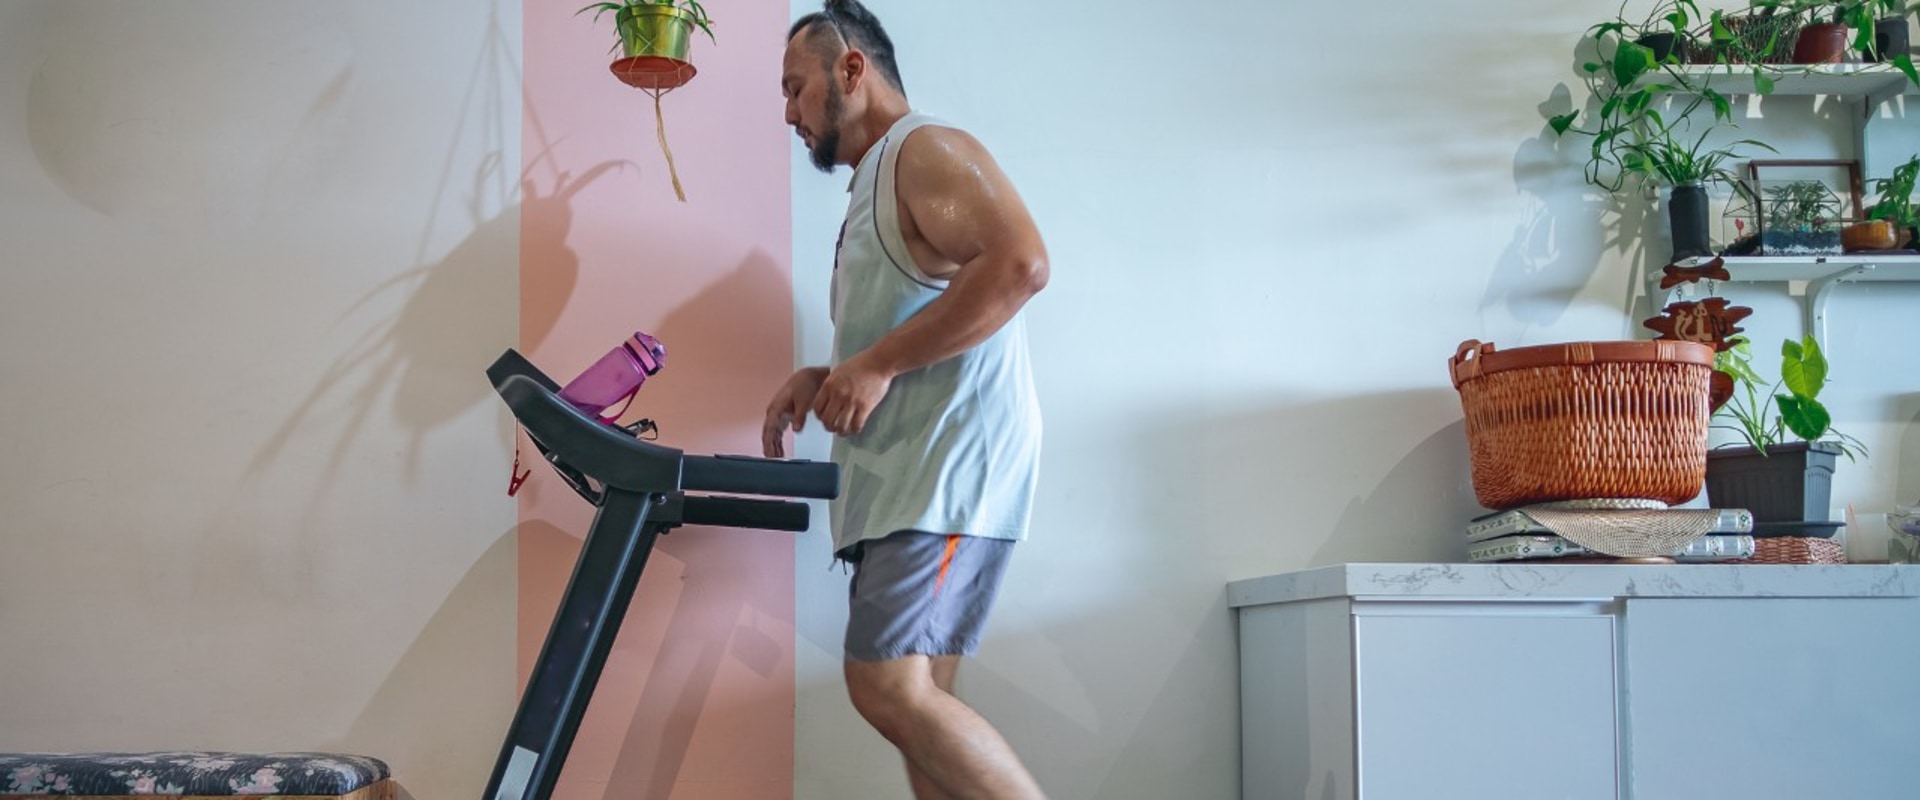 The Benefits of Treadmills and Ellipticals for CrossFit